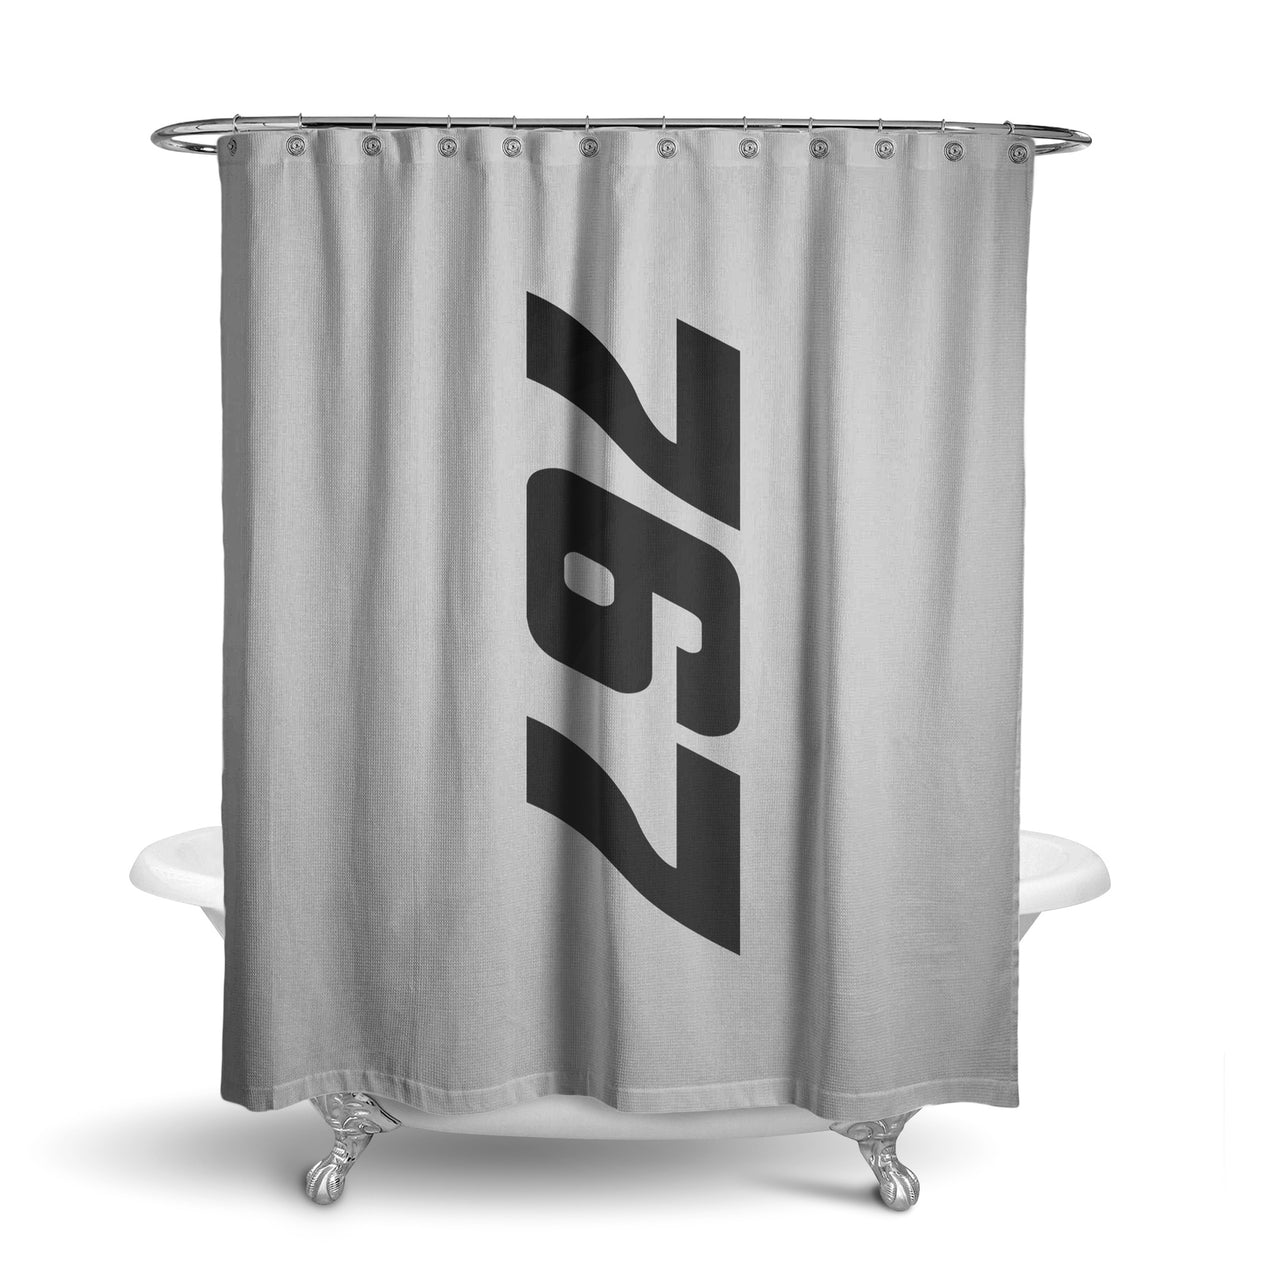 Boeing 767 Text Designed Shower Curtains